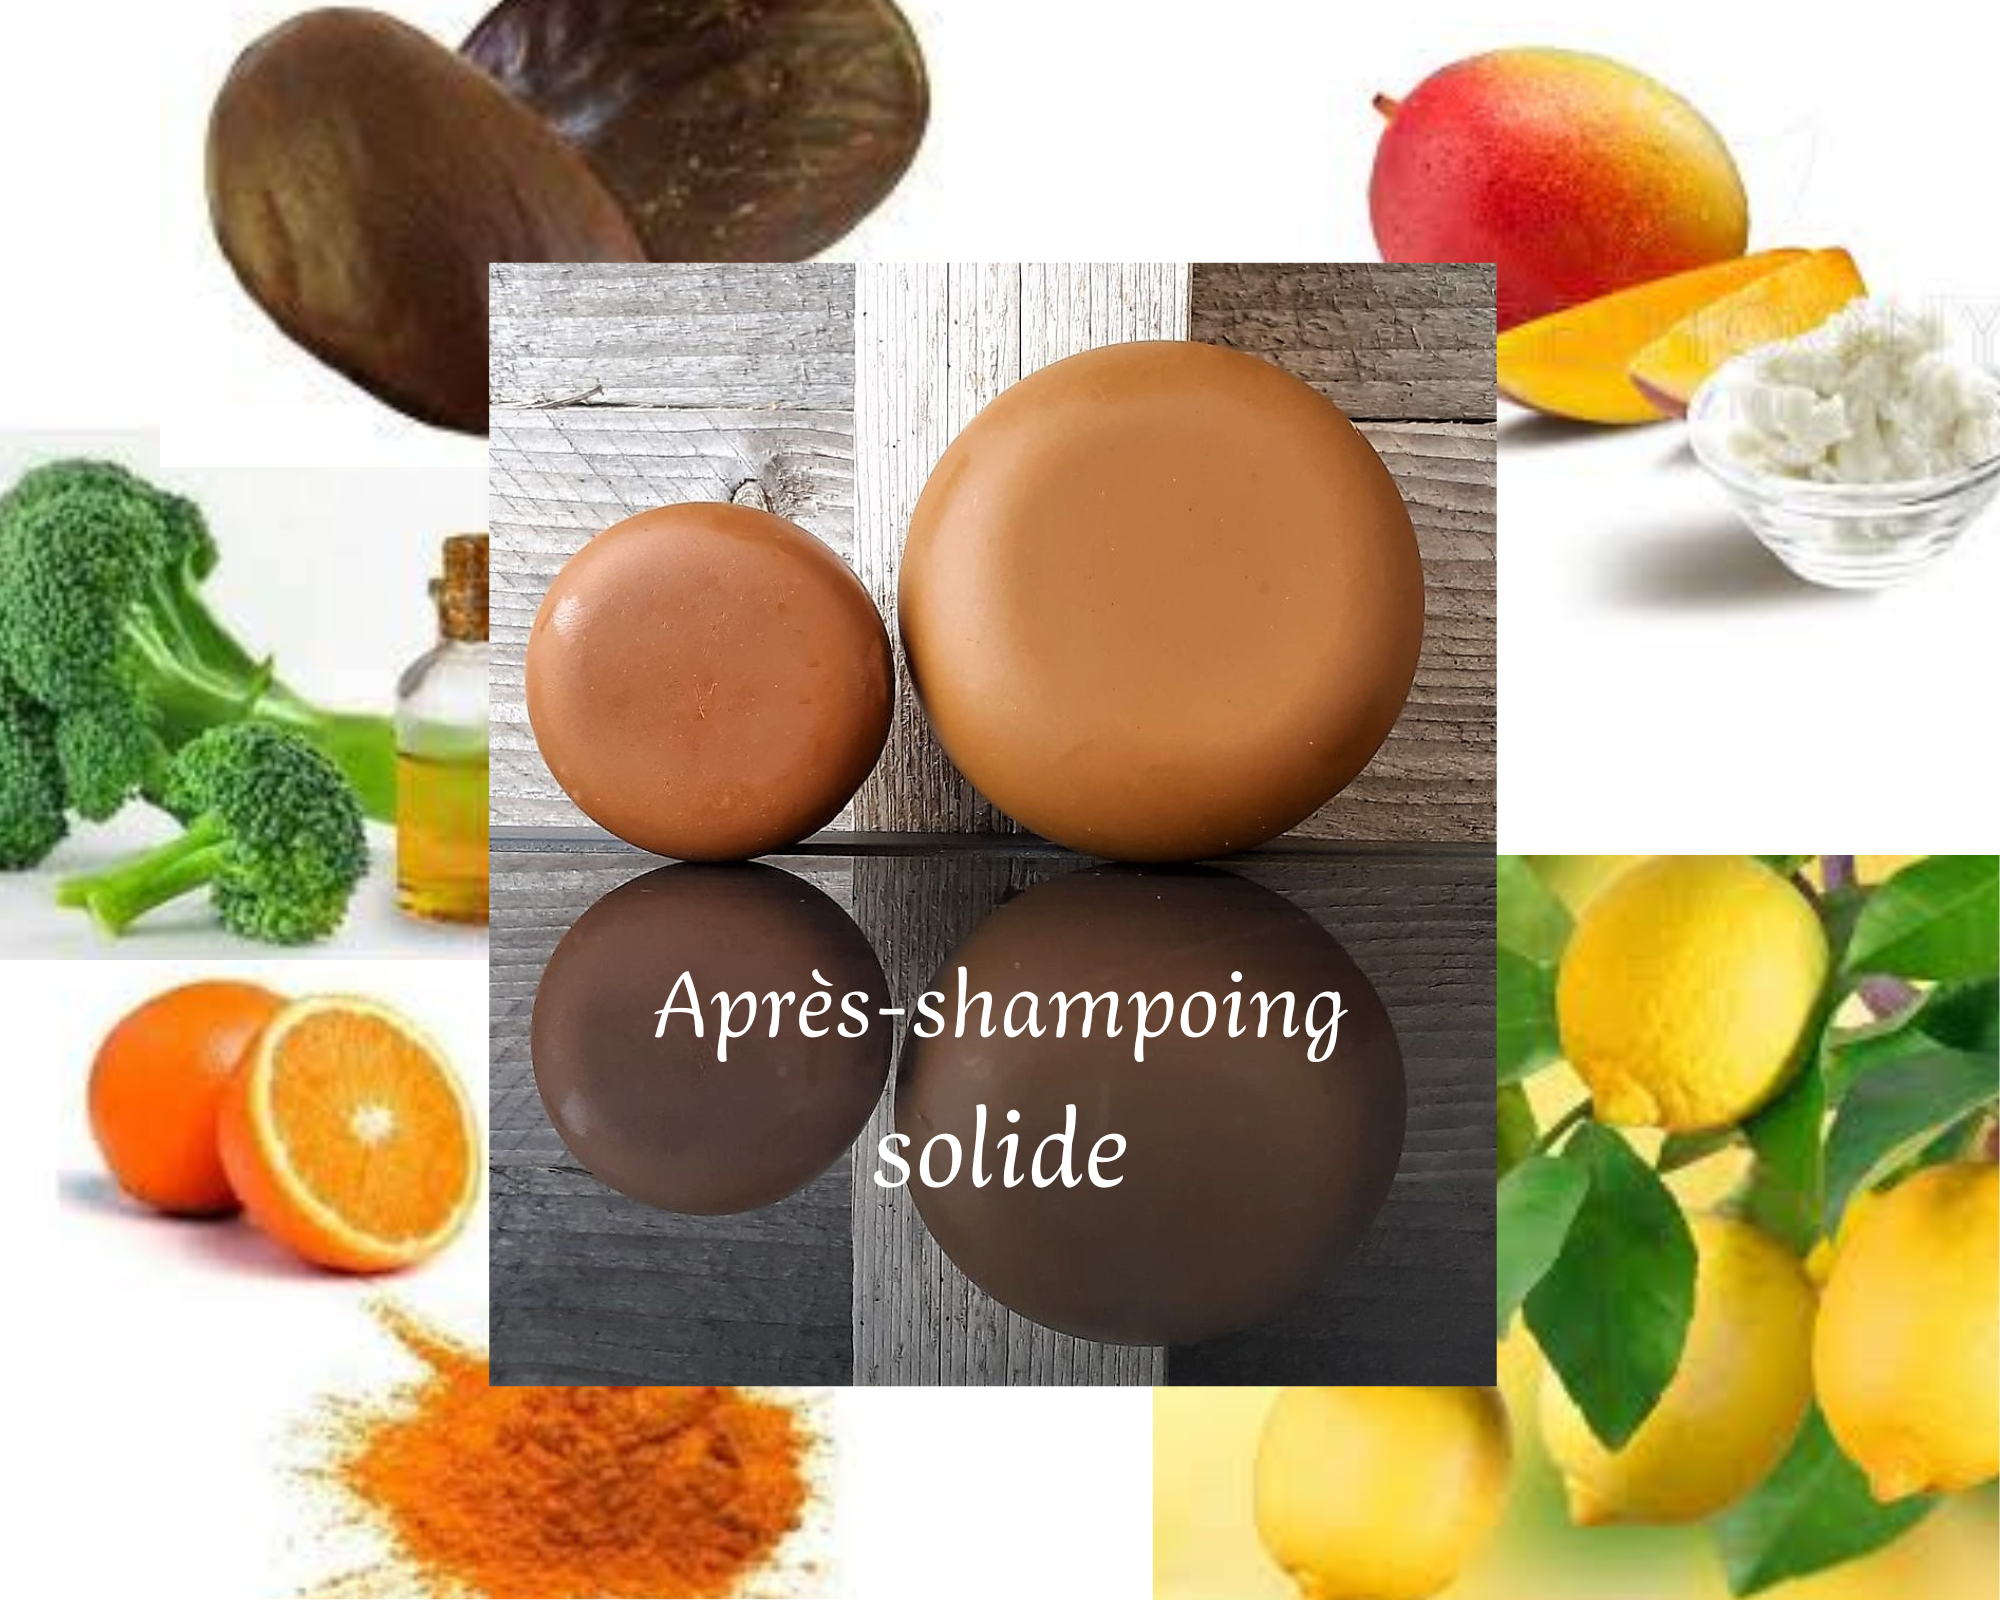 Après-shampoing solide